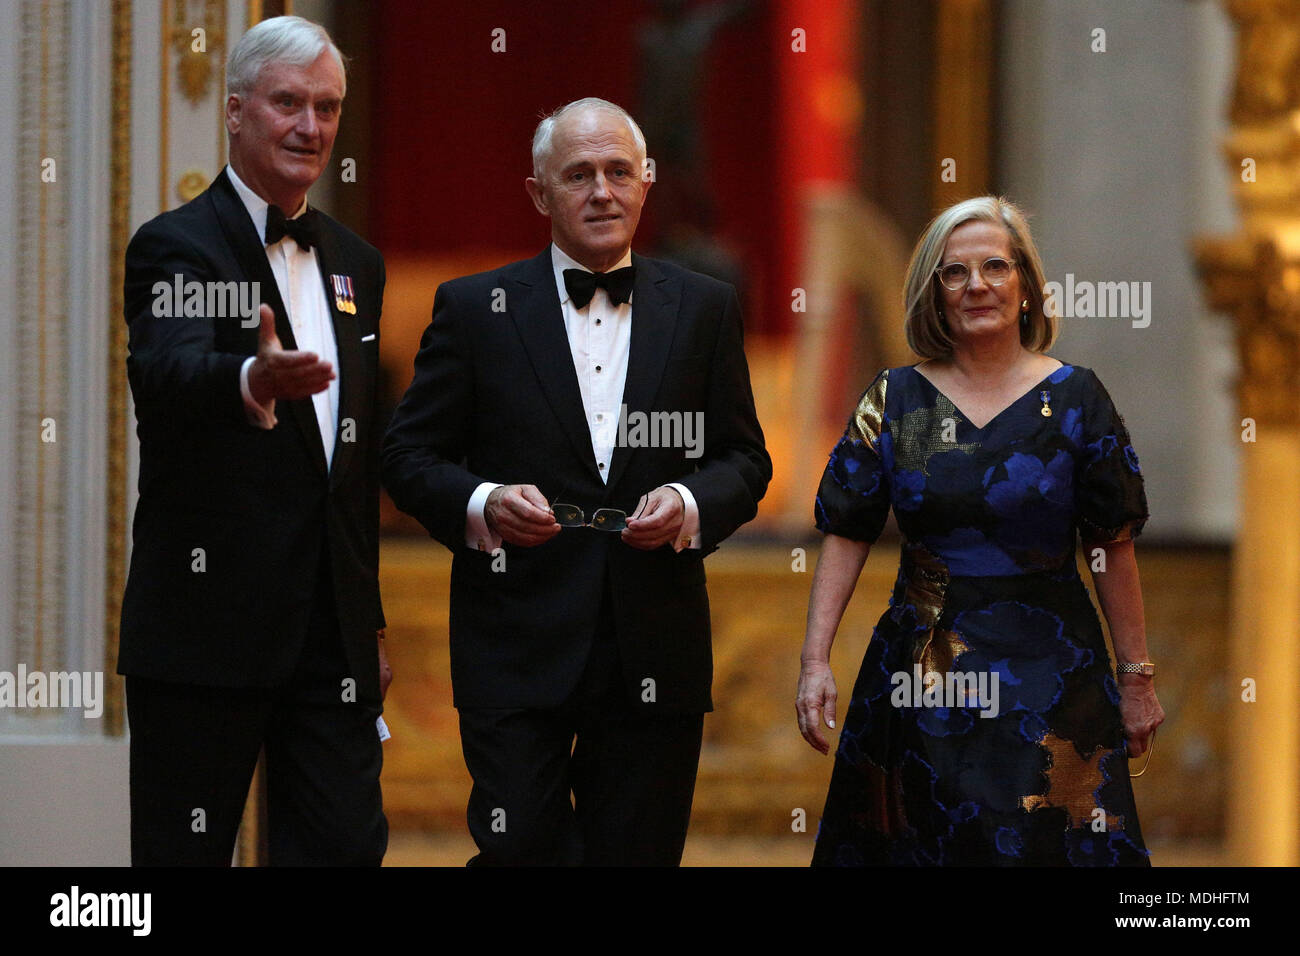 Australia's Prime Minister Malcolm Turnbull (centre) and his wife Lucy arrive in the East Gallery at Buckingham Palace in London as Queen Elizabeth II hosts a dinner during the Commonwealth Heads of Government Meeting. Stock Photo